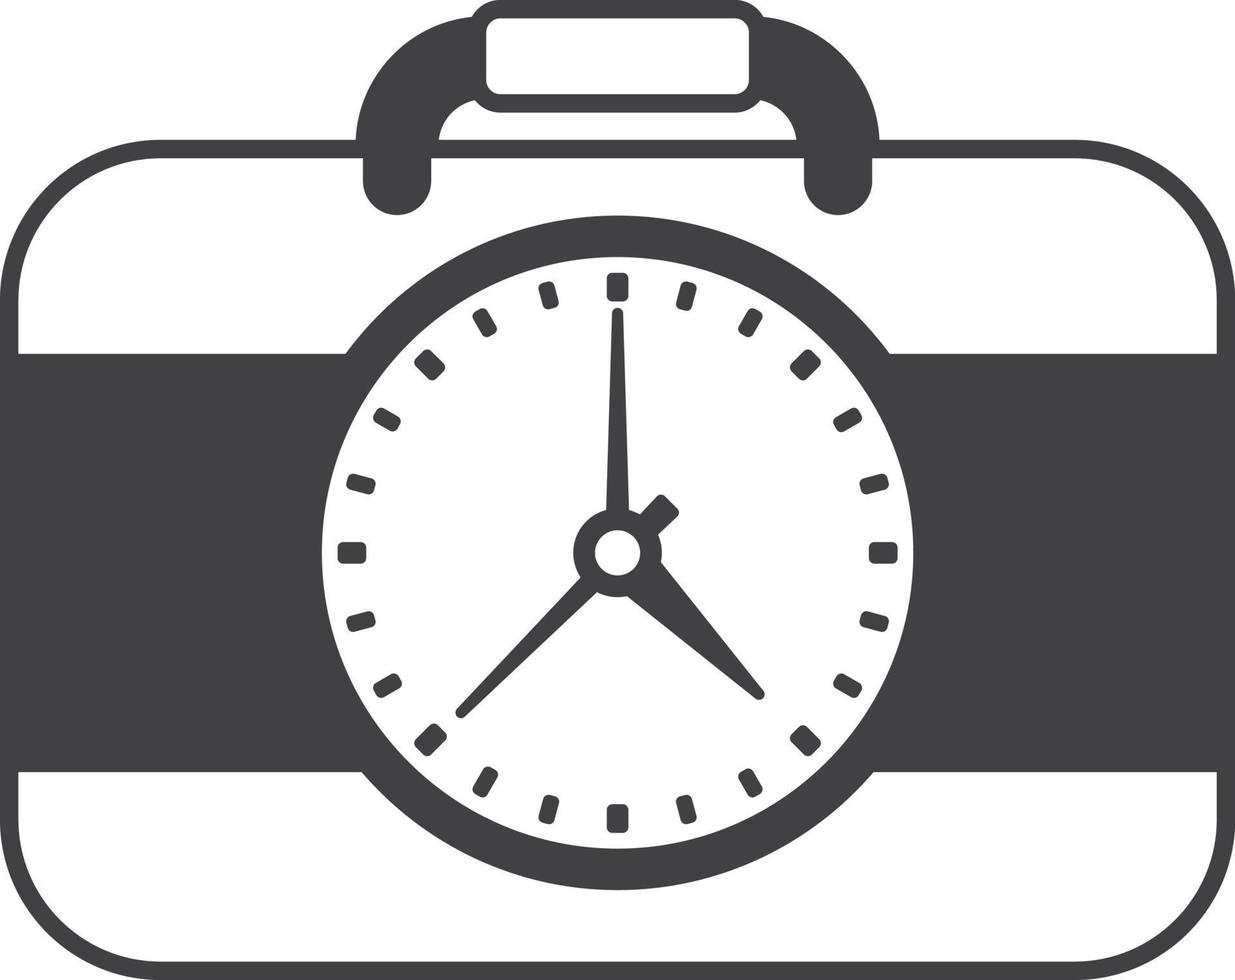 business bags and watches illustration in minimal style vector